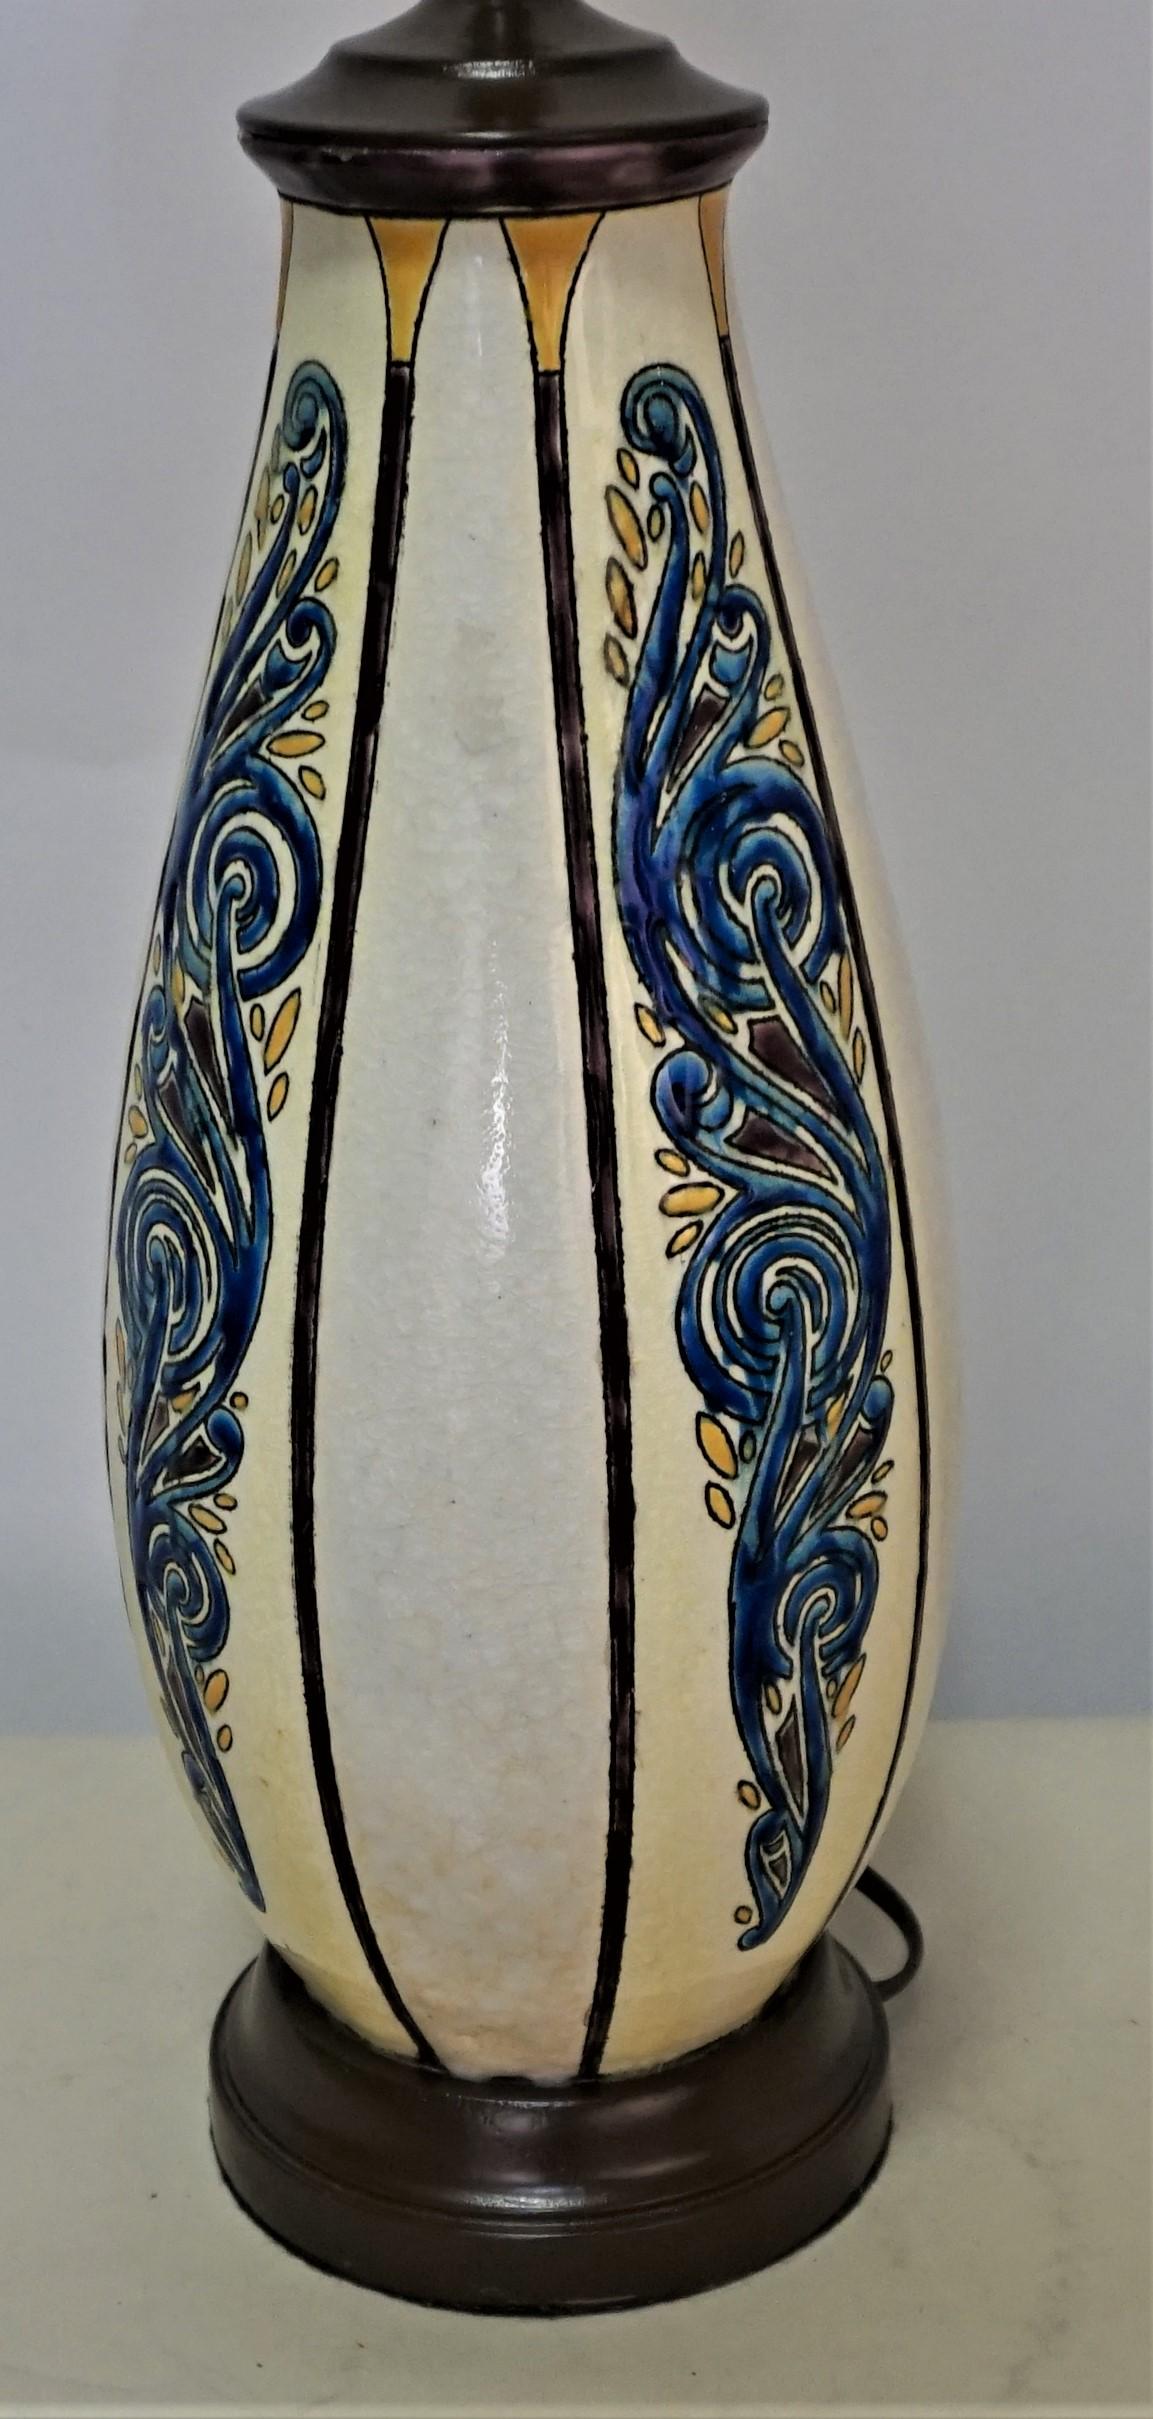 Lacquered Belgium Art Deco Ceramic Vase Electrified as a Lamp by Durfrene M. Mauritius